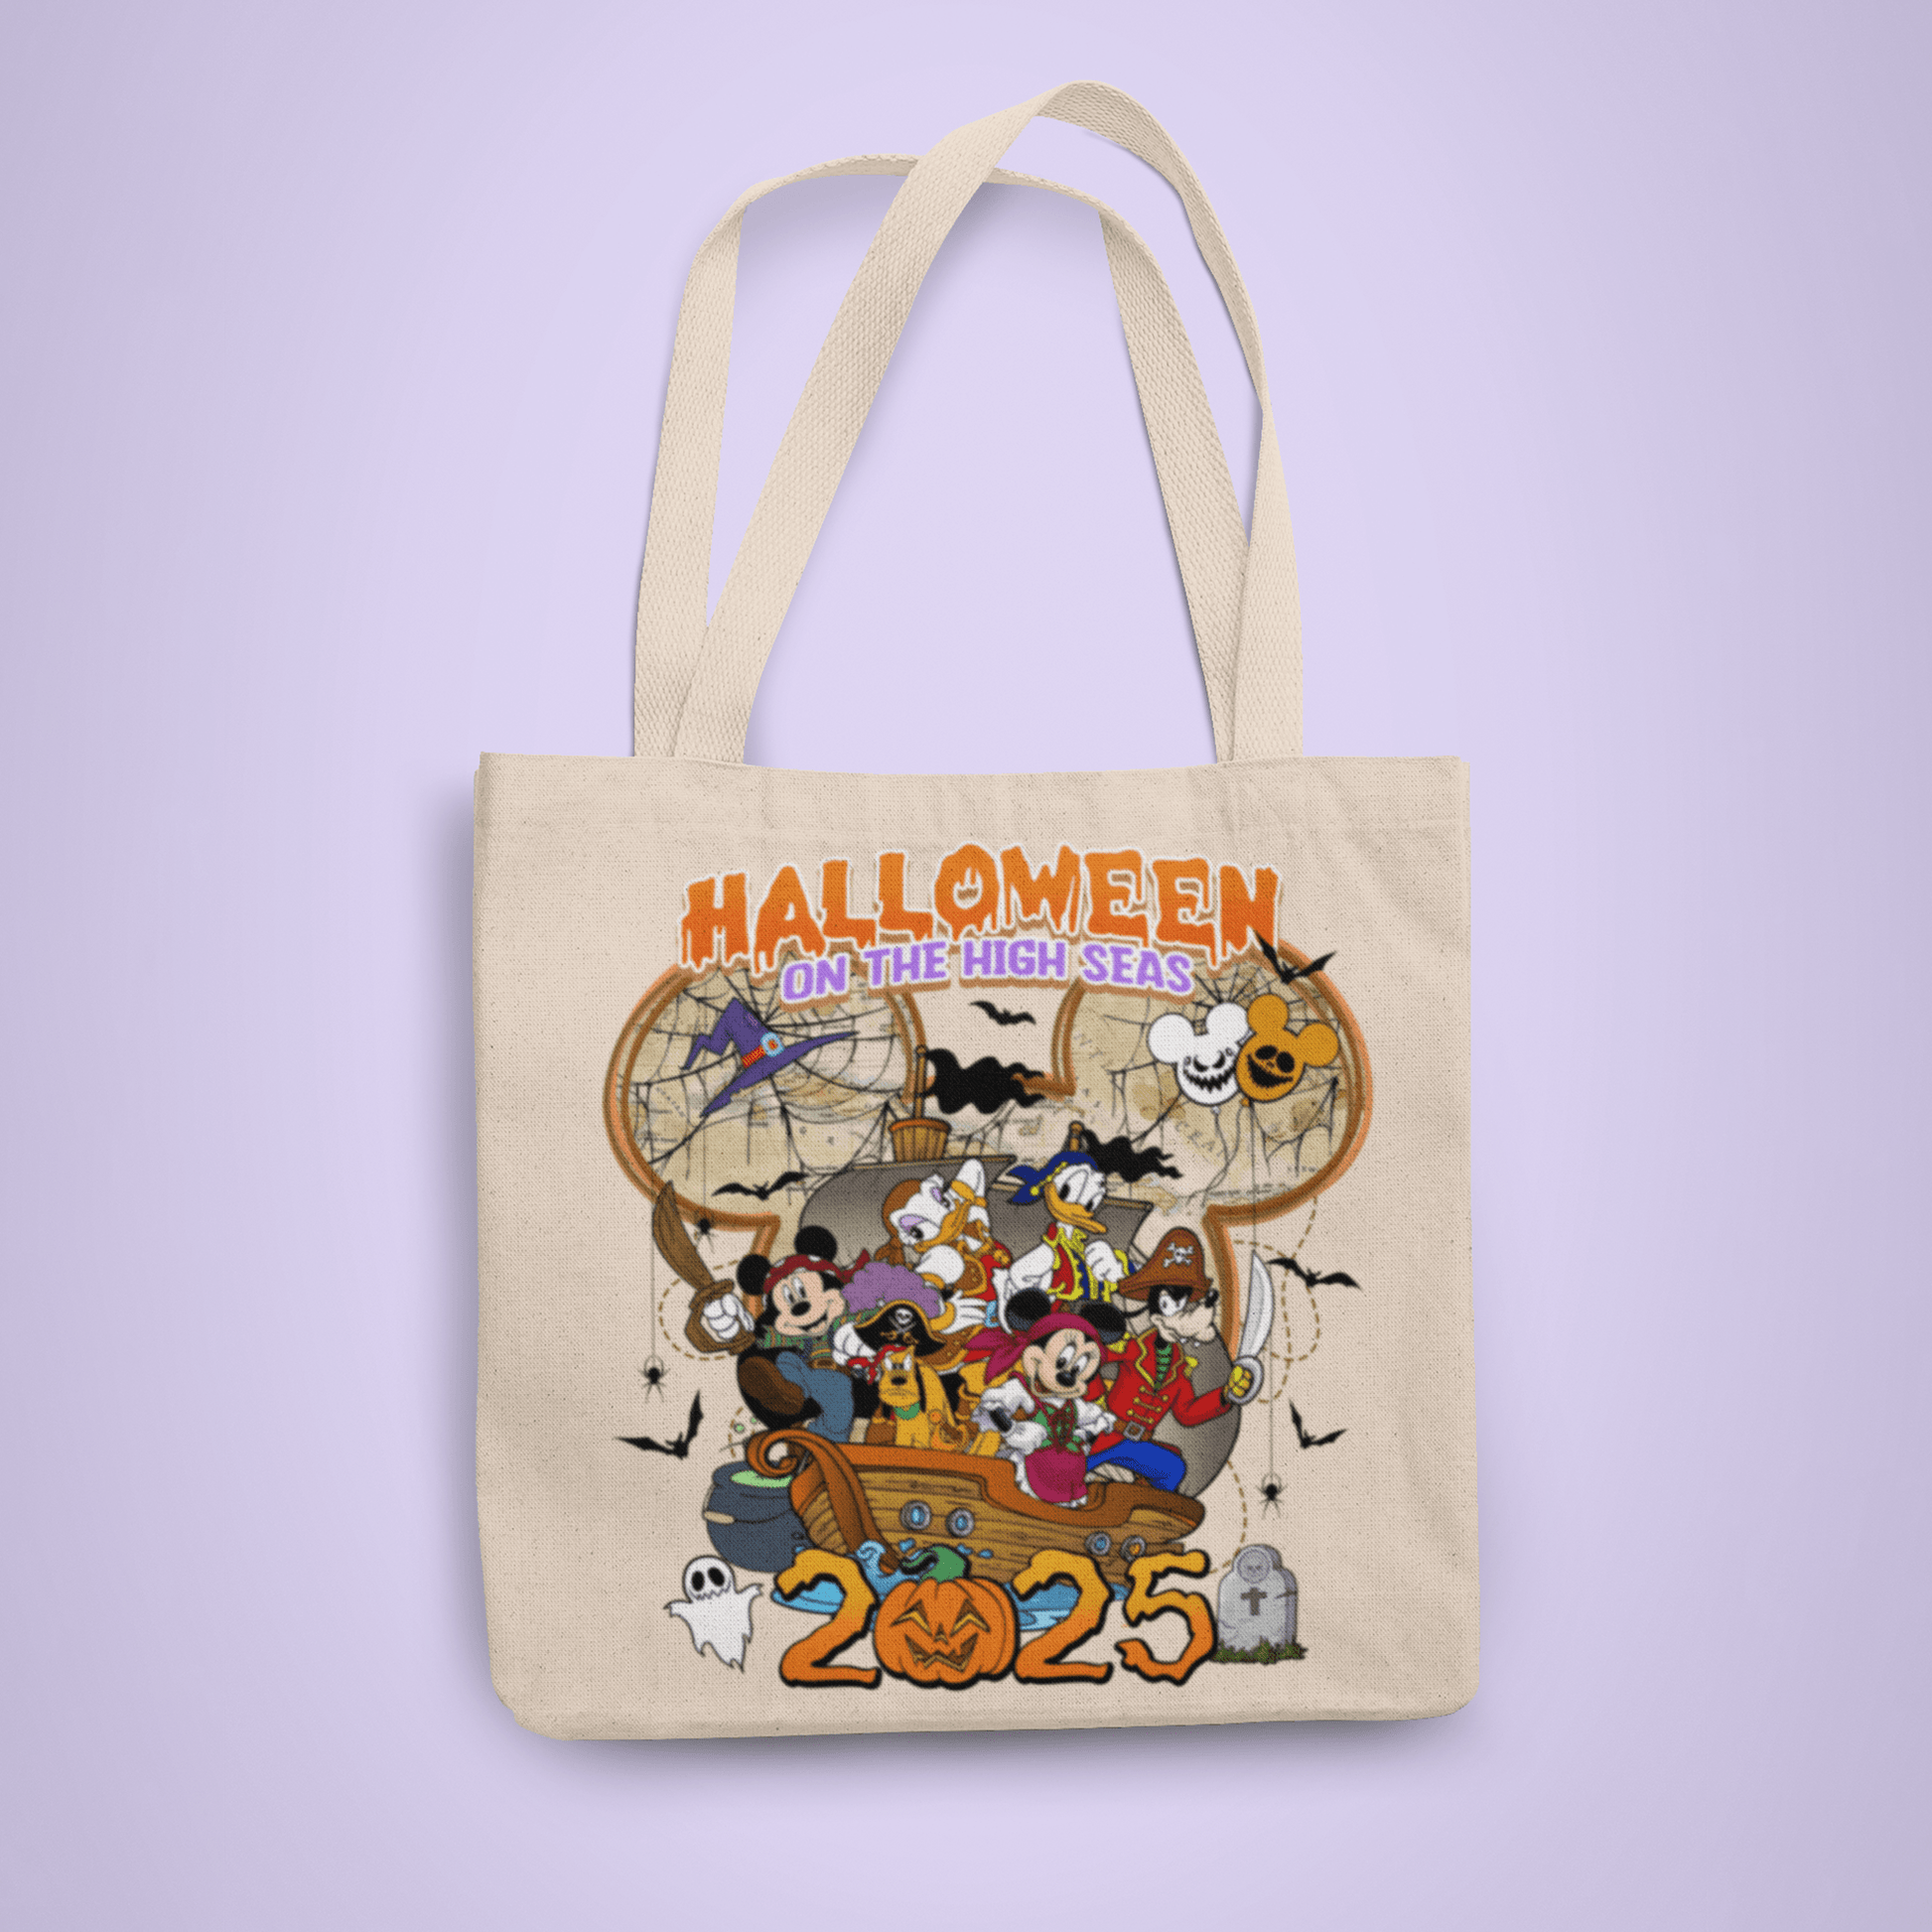 Disney Cruise Line Personalized Trick or Treat Tote Bag - Halloween on the High Seas 2025 - Two Crafty Gays